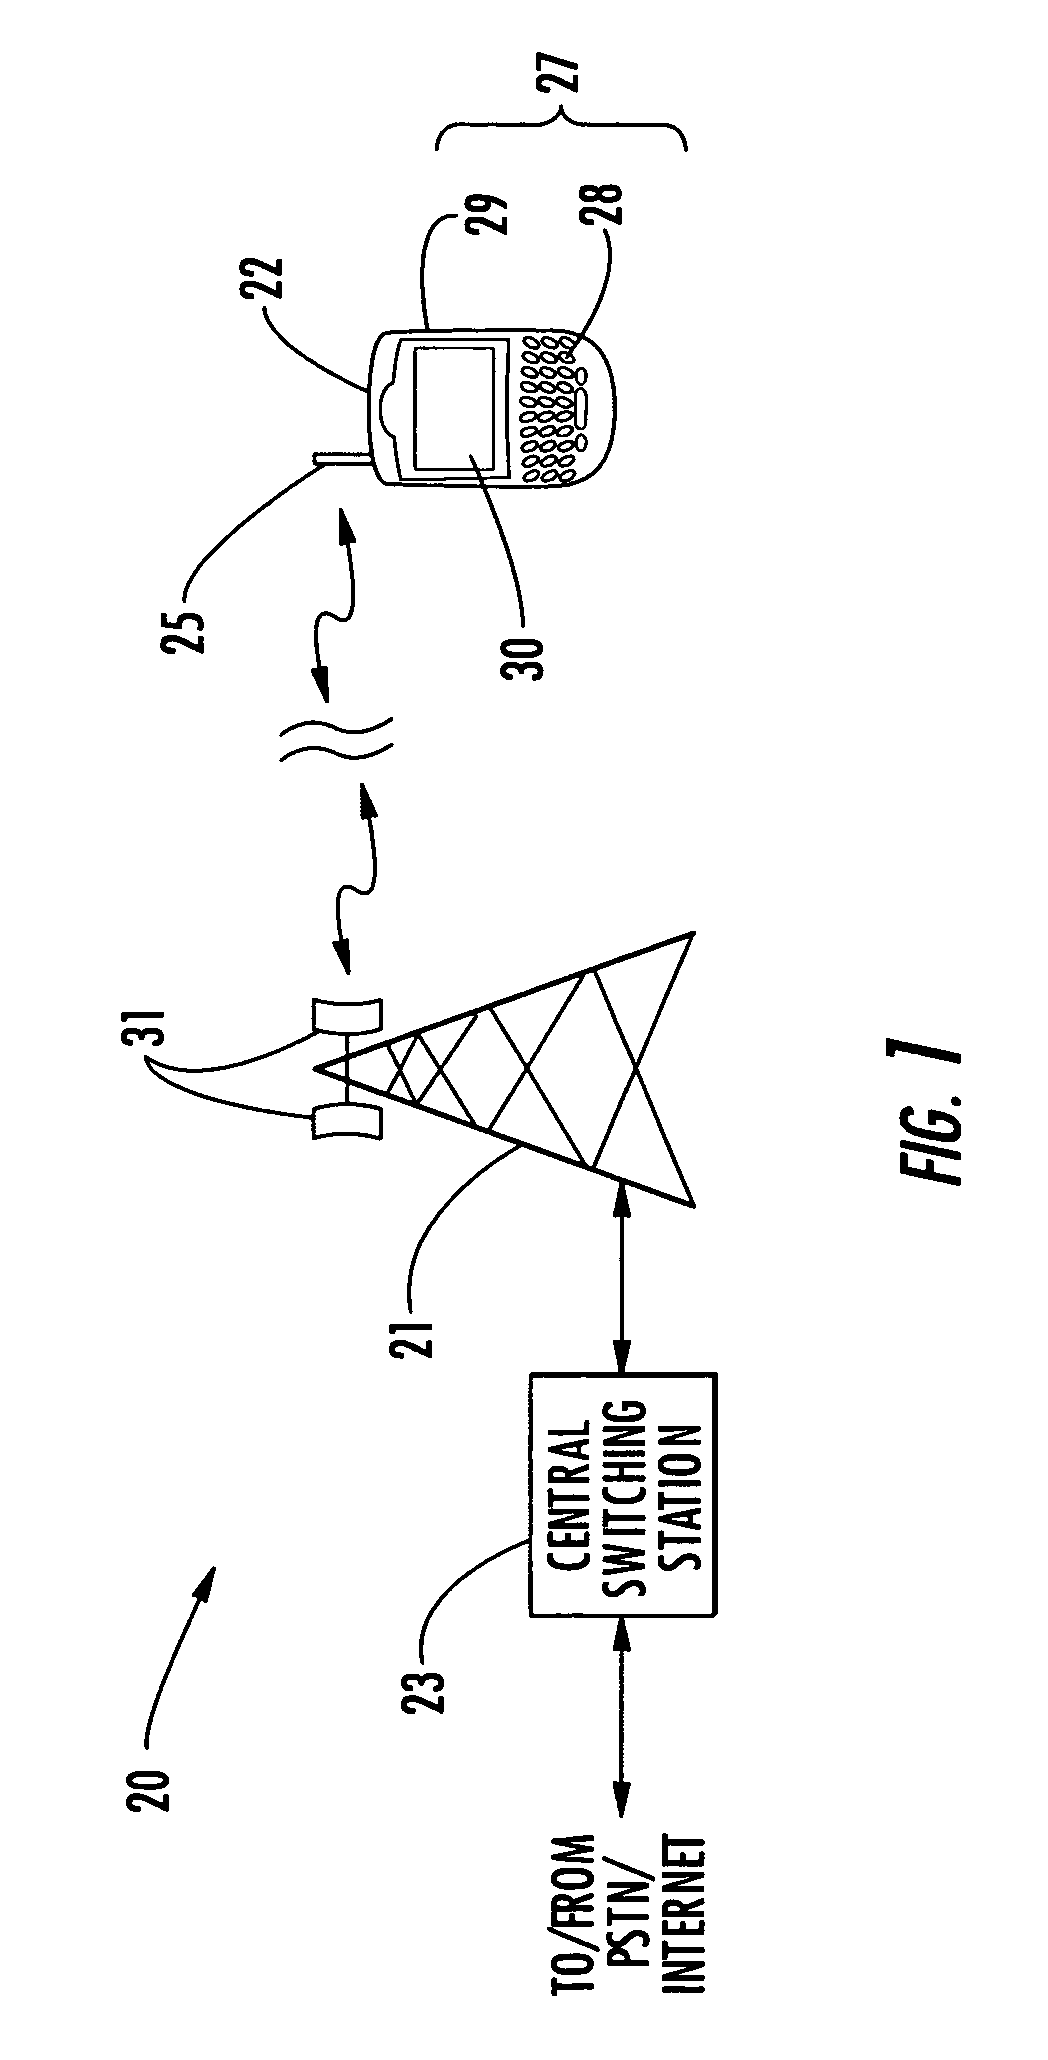 Cellular communications system providing mobile cellular device battery saving features while accommodating user access requests and related methods